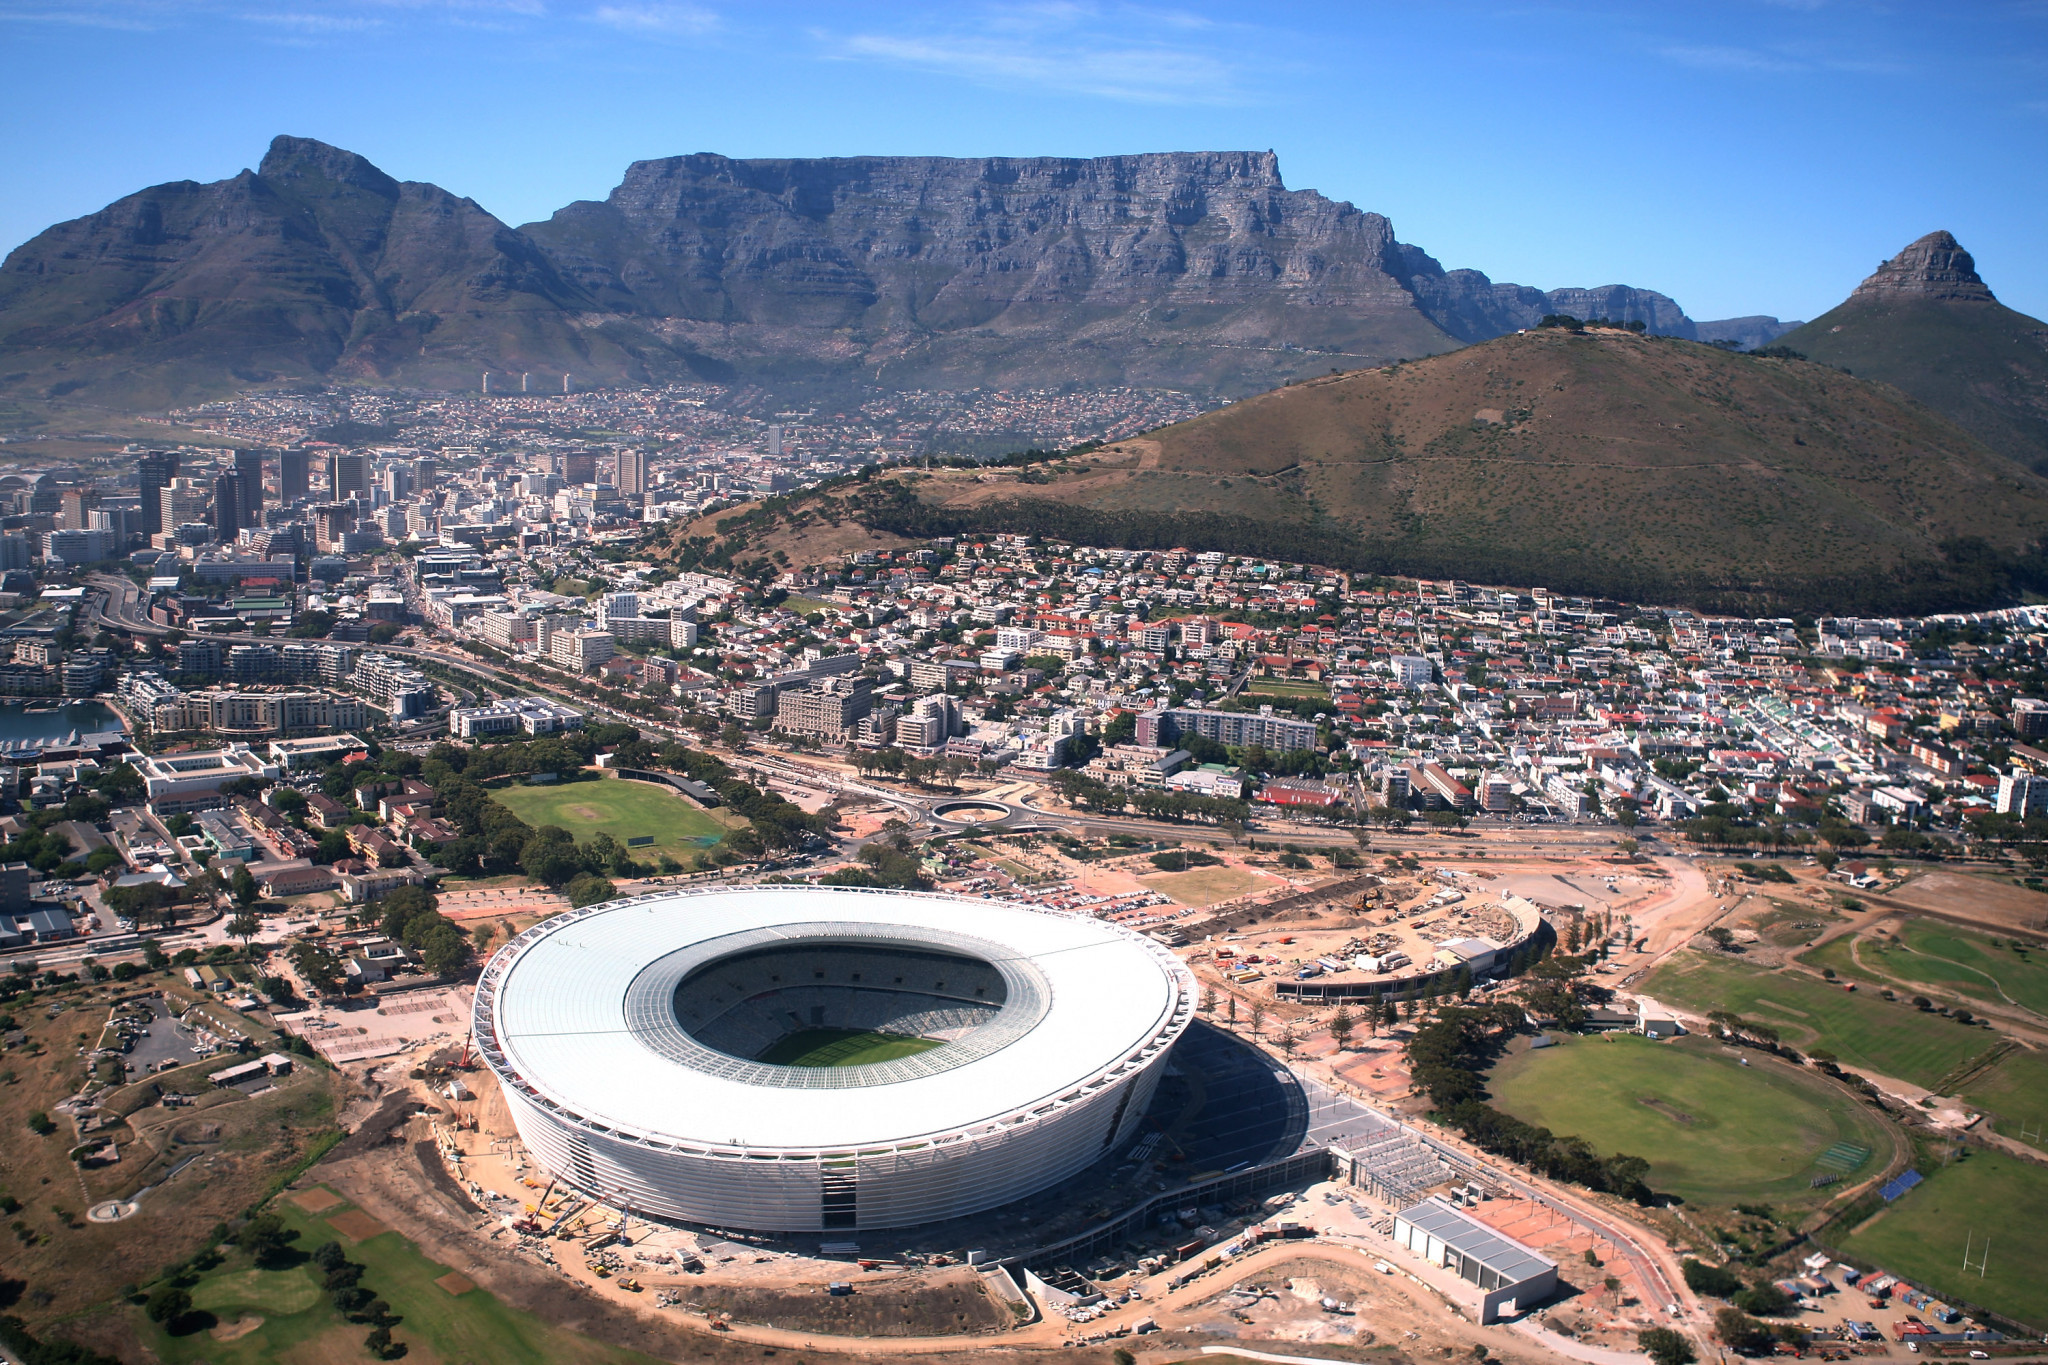 South Africa's bid for the 2027 FIFA Women's World Cup includes existing infrastructure such as the Cape Town Stadium ©Getty Images